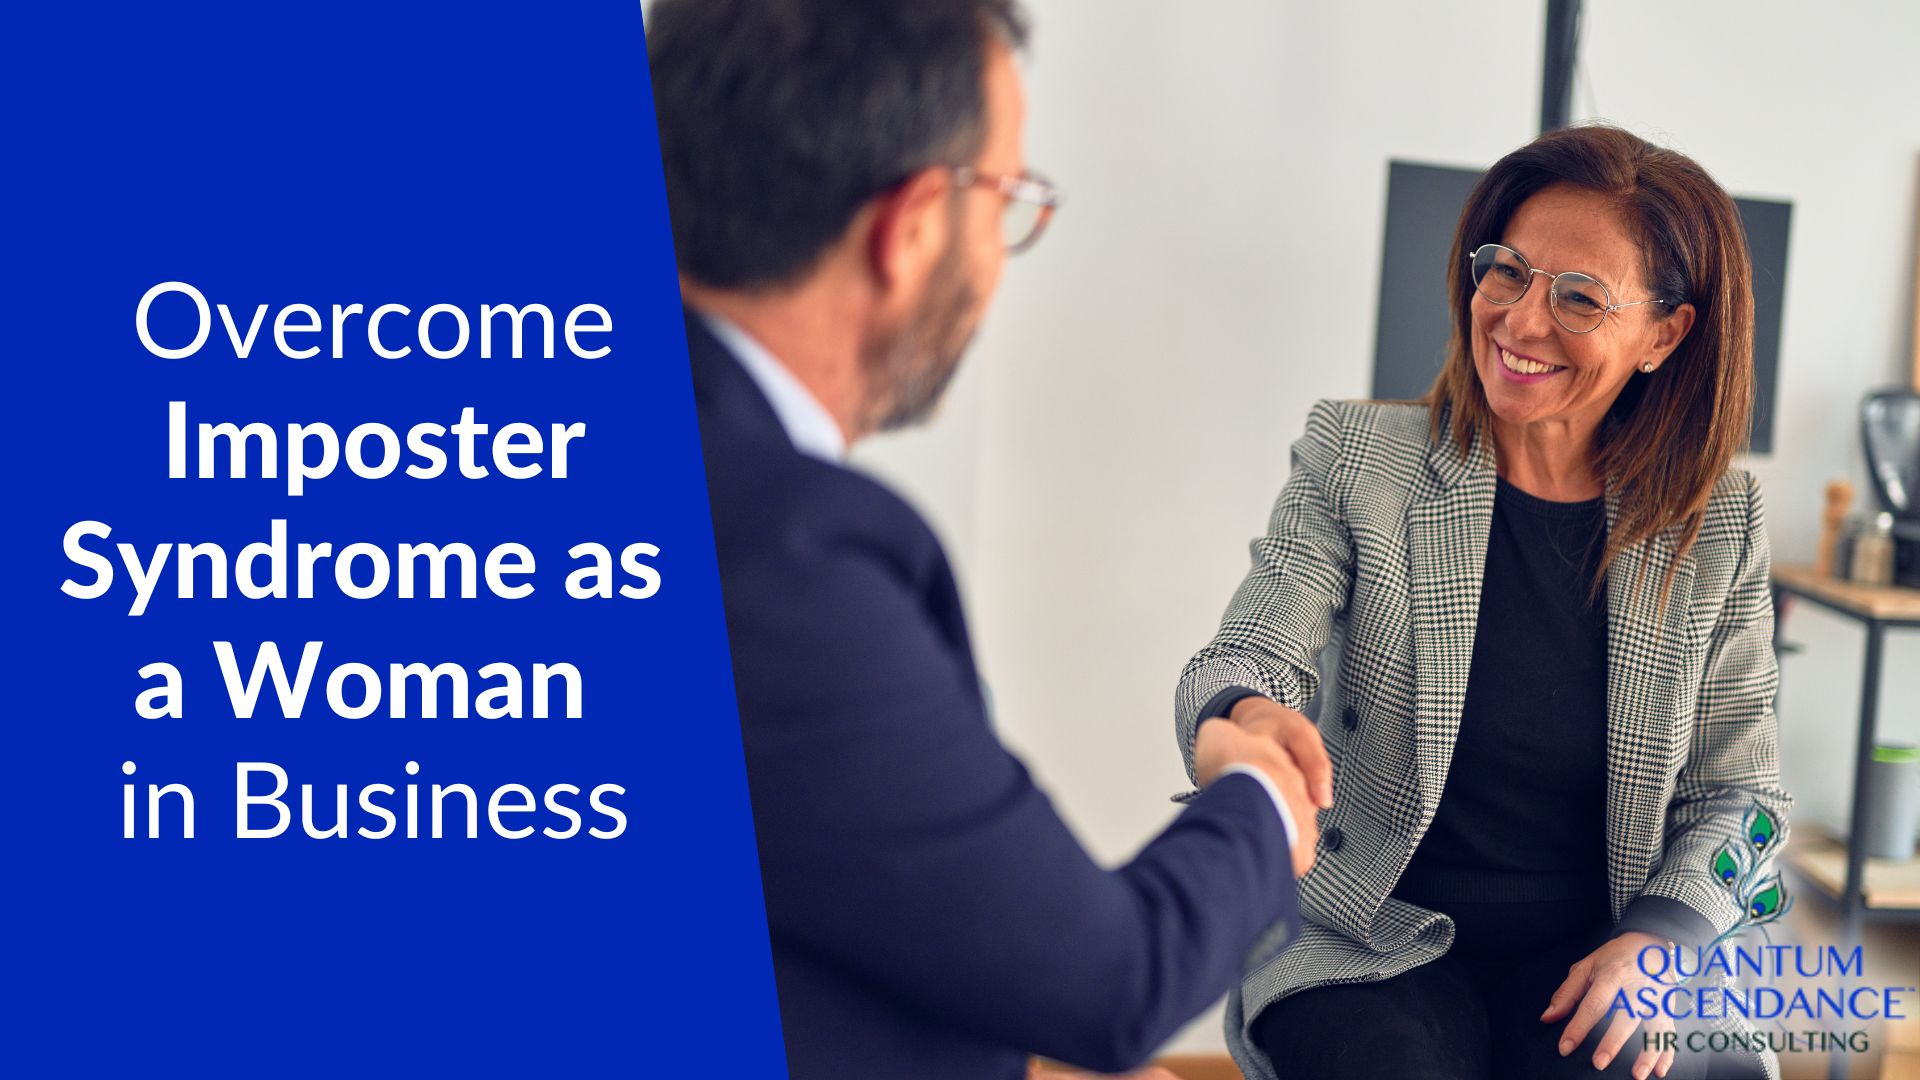 Overcome Imposter Syndrome as a Woman in Business